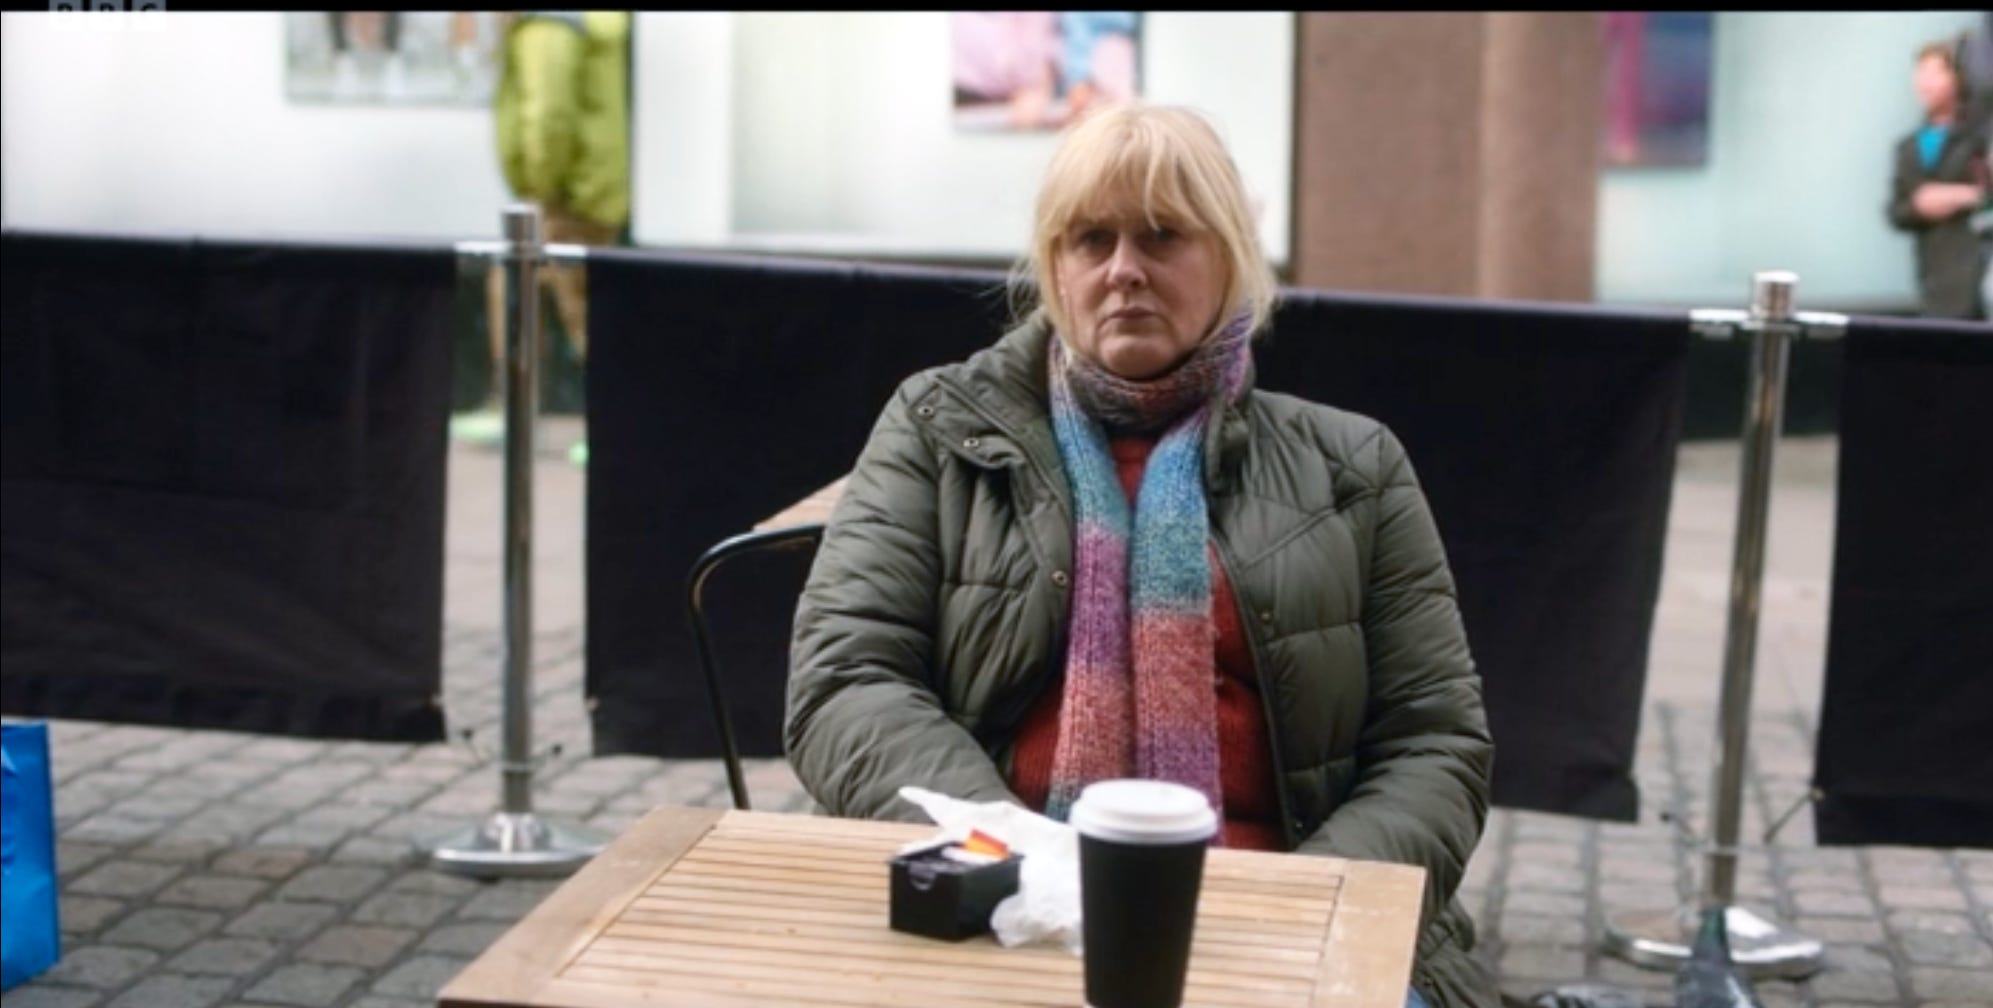 Sarah Lancashire, as Catherine in the drama, happy Valley, sitting looking despondent at an outdoor table at a café.